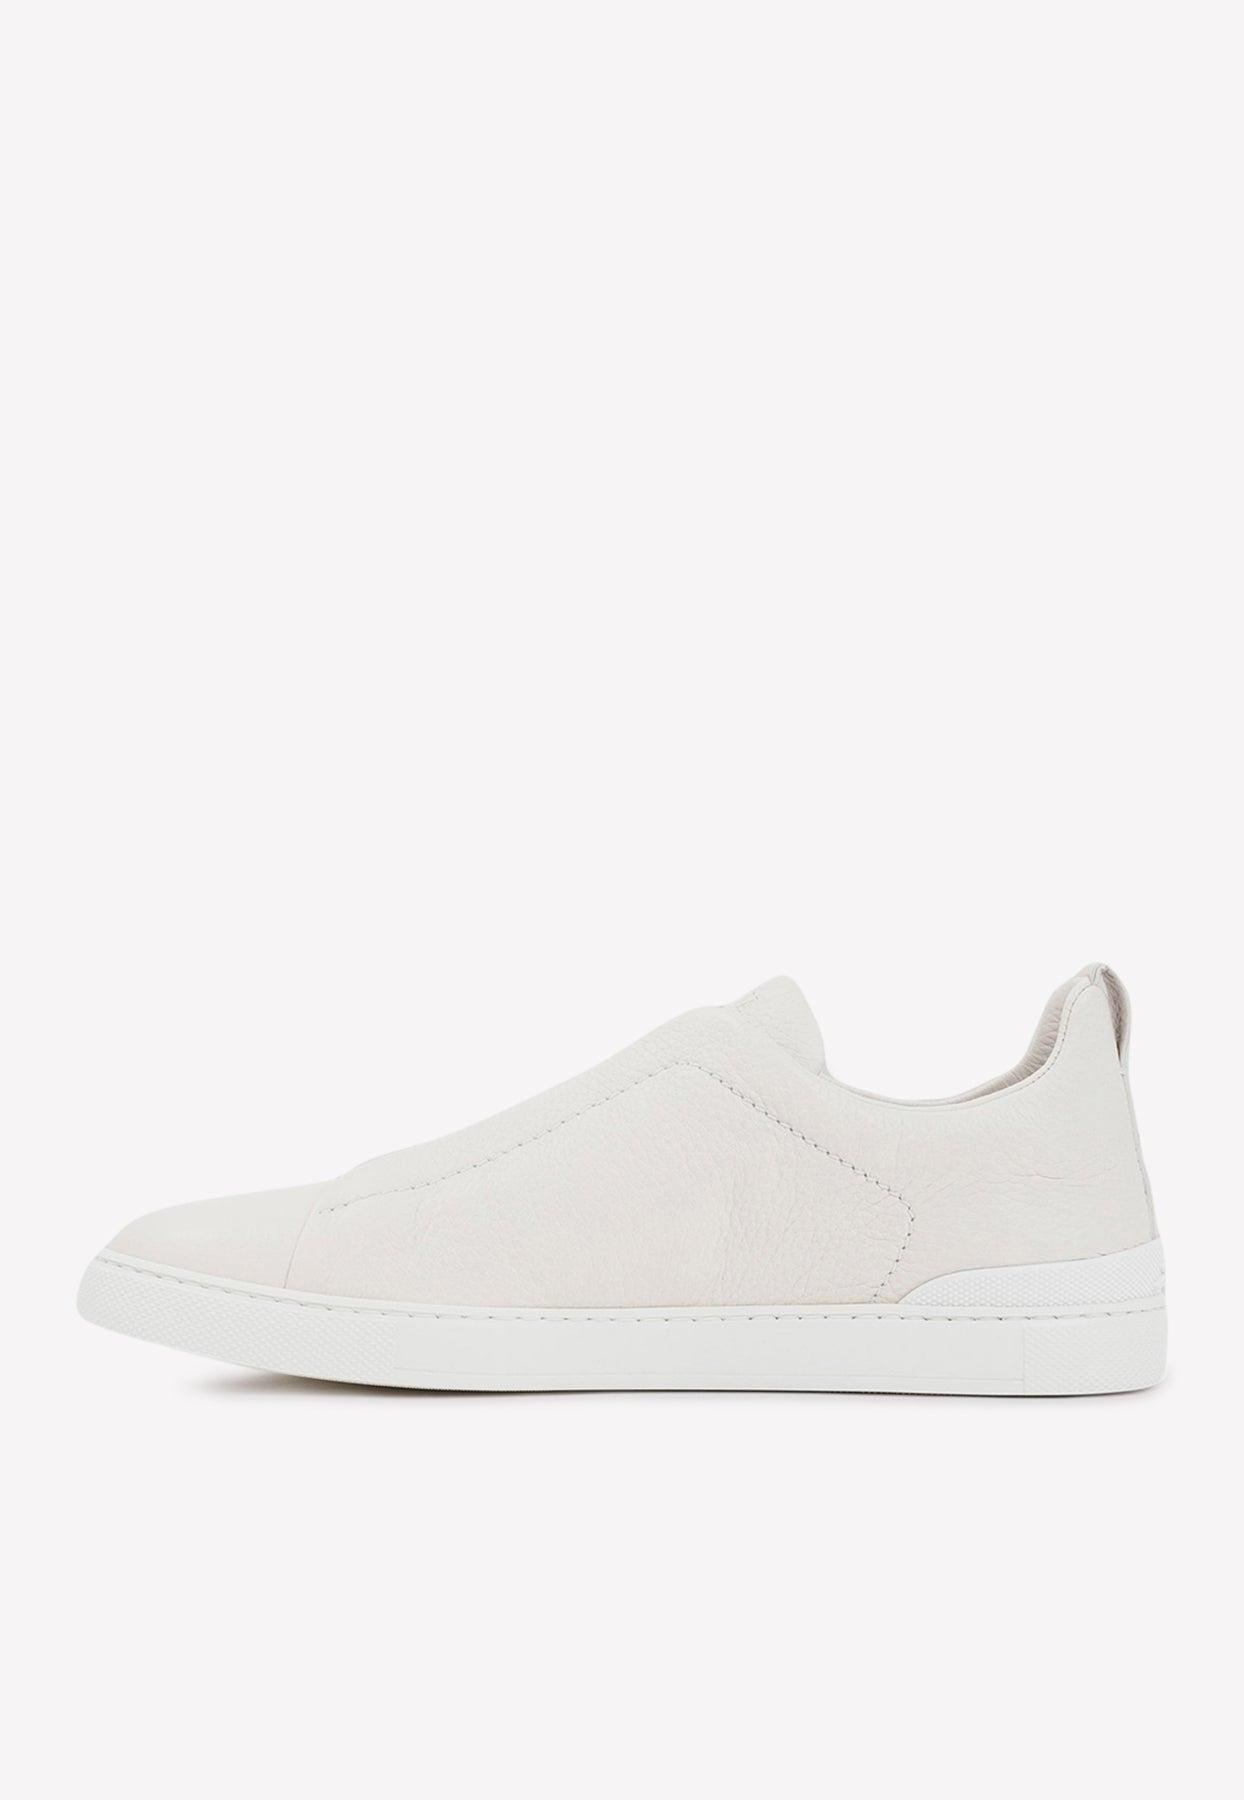 Zegna Triple Stitch Low-top Sneakers in White for Men | Lyst